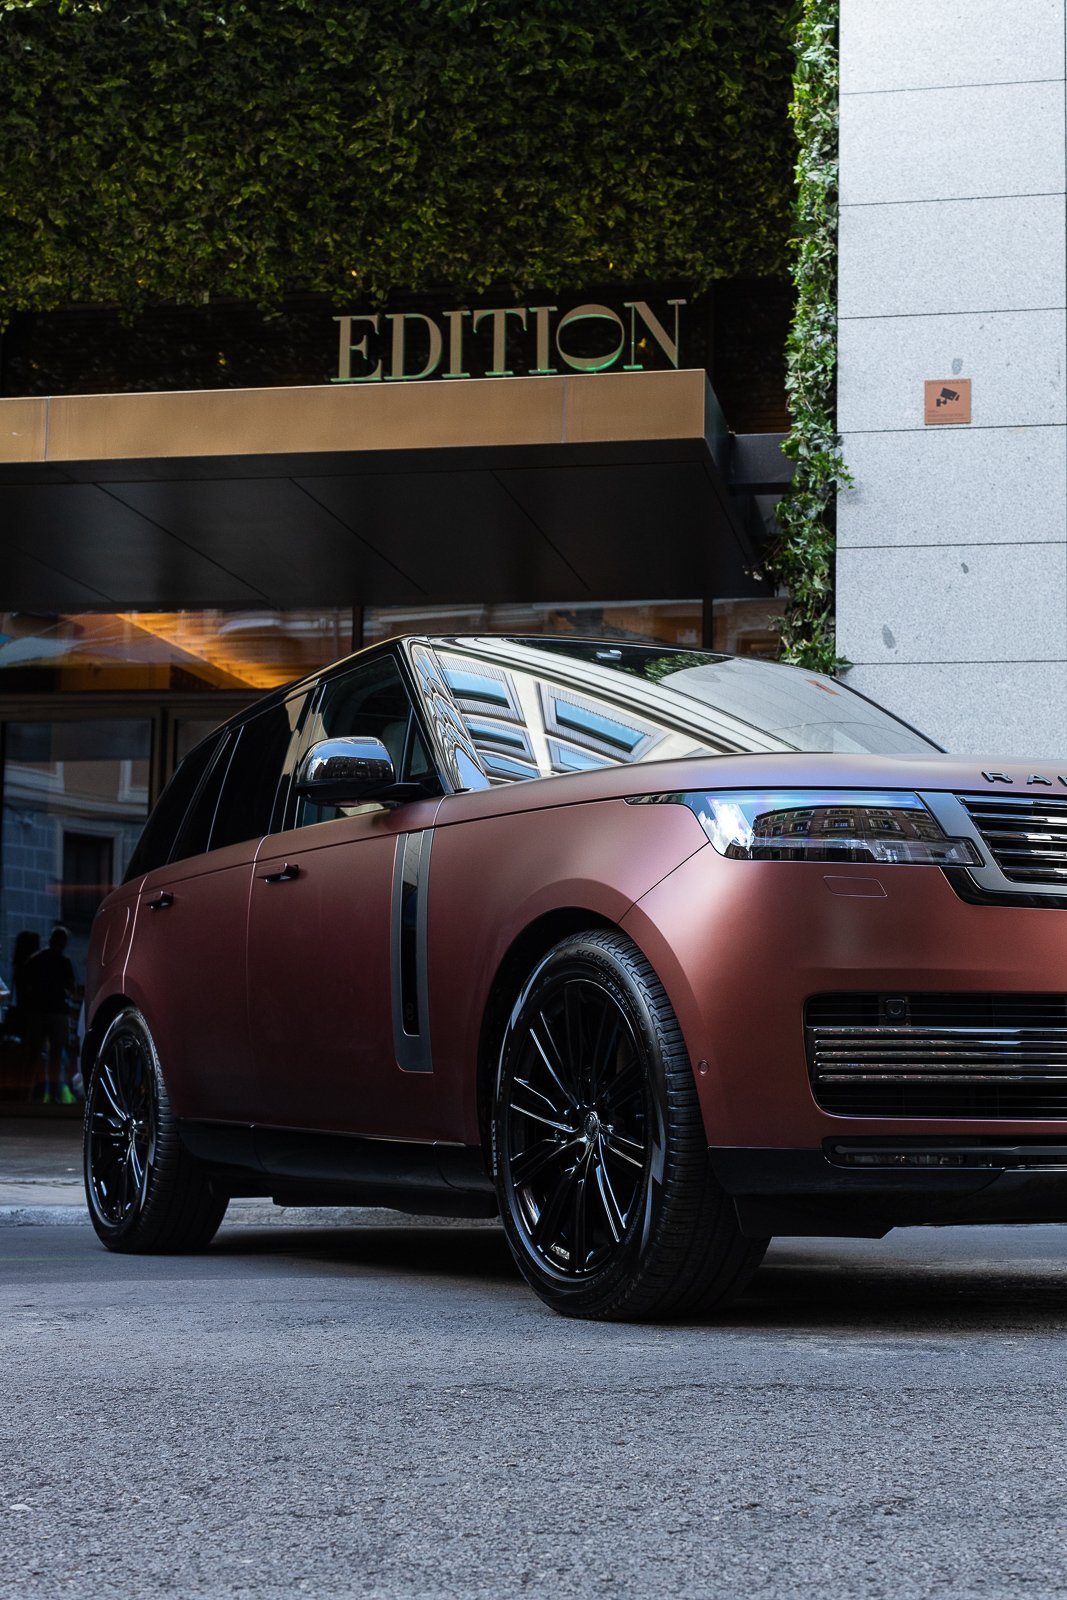 Range Rover Outside The Madrid Edition